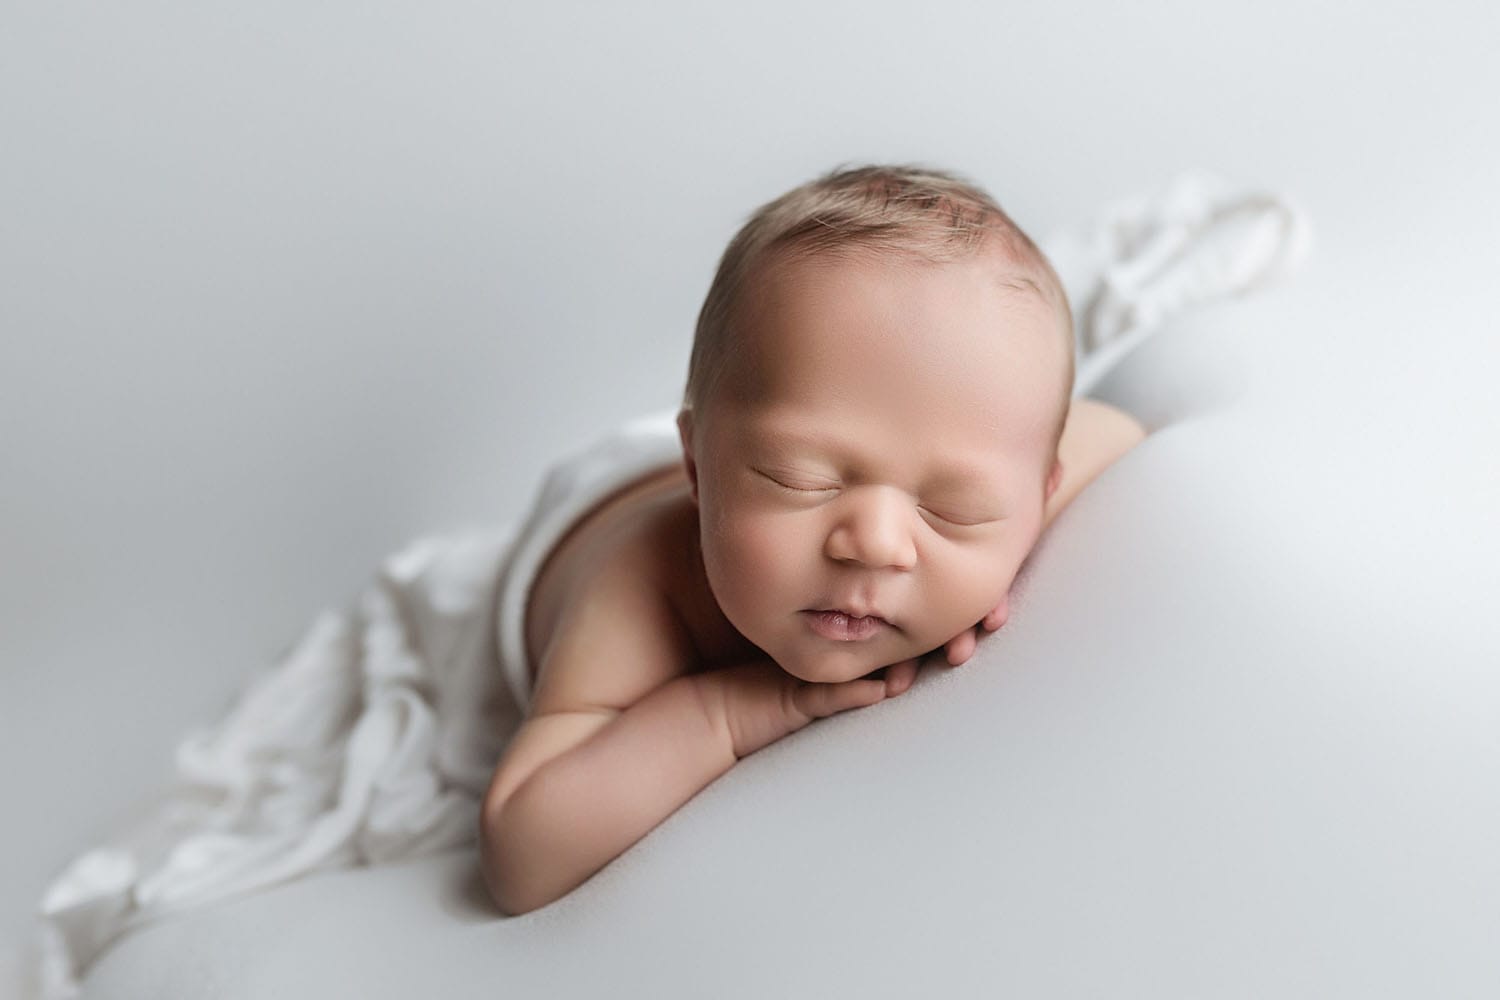 A baby boy in the studio lying on a white backdrop with fabric draped over his back posed with his chin resting on his hands.